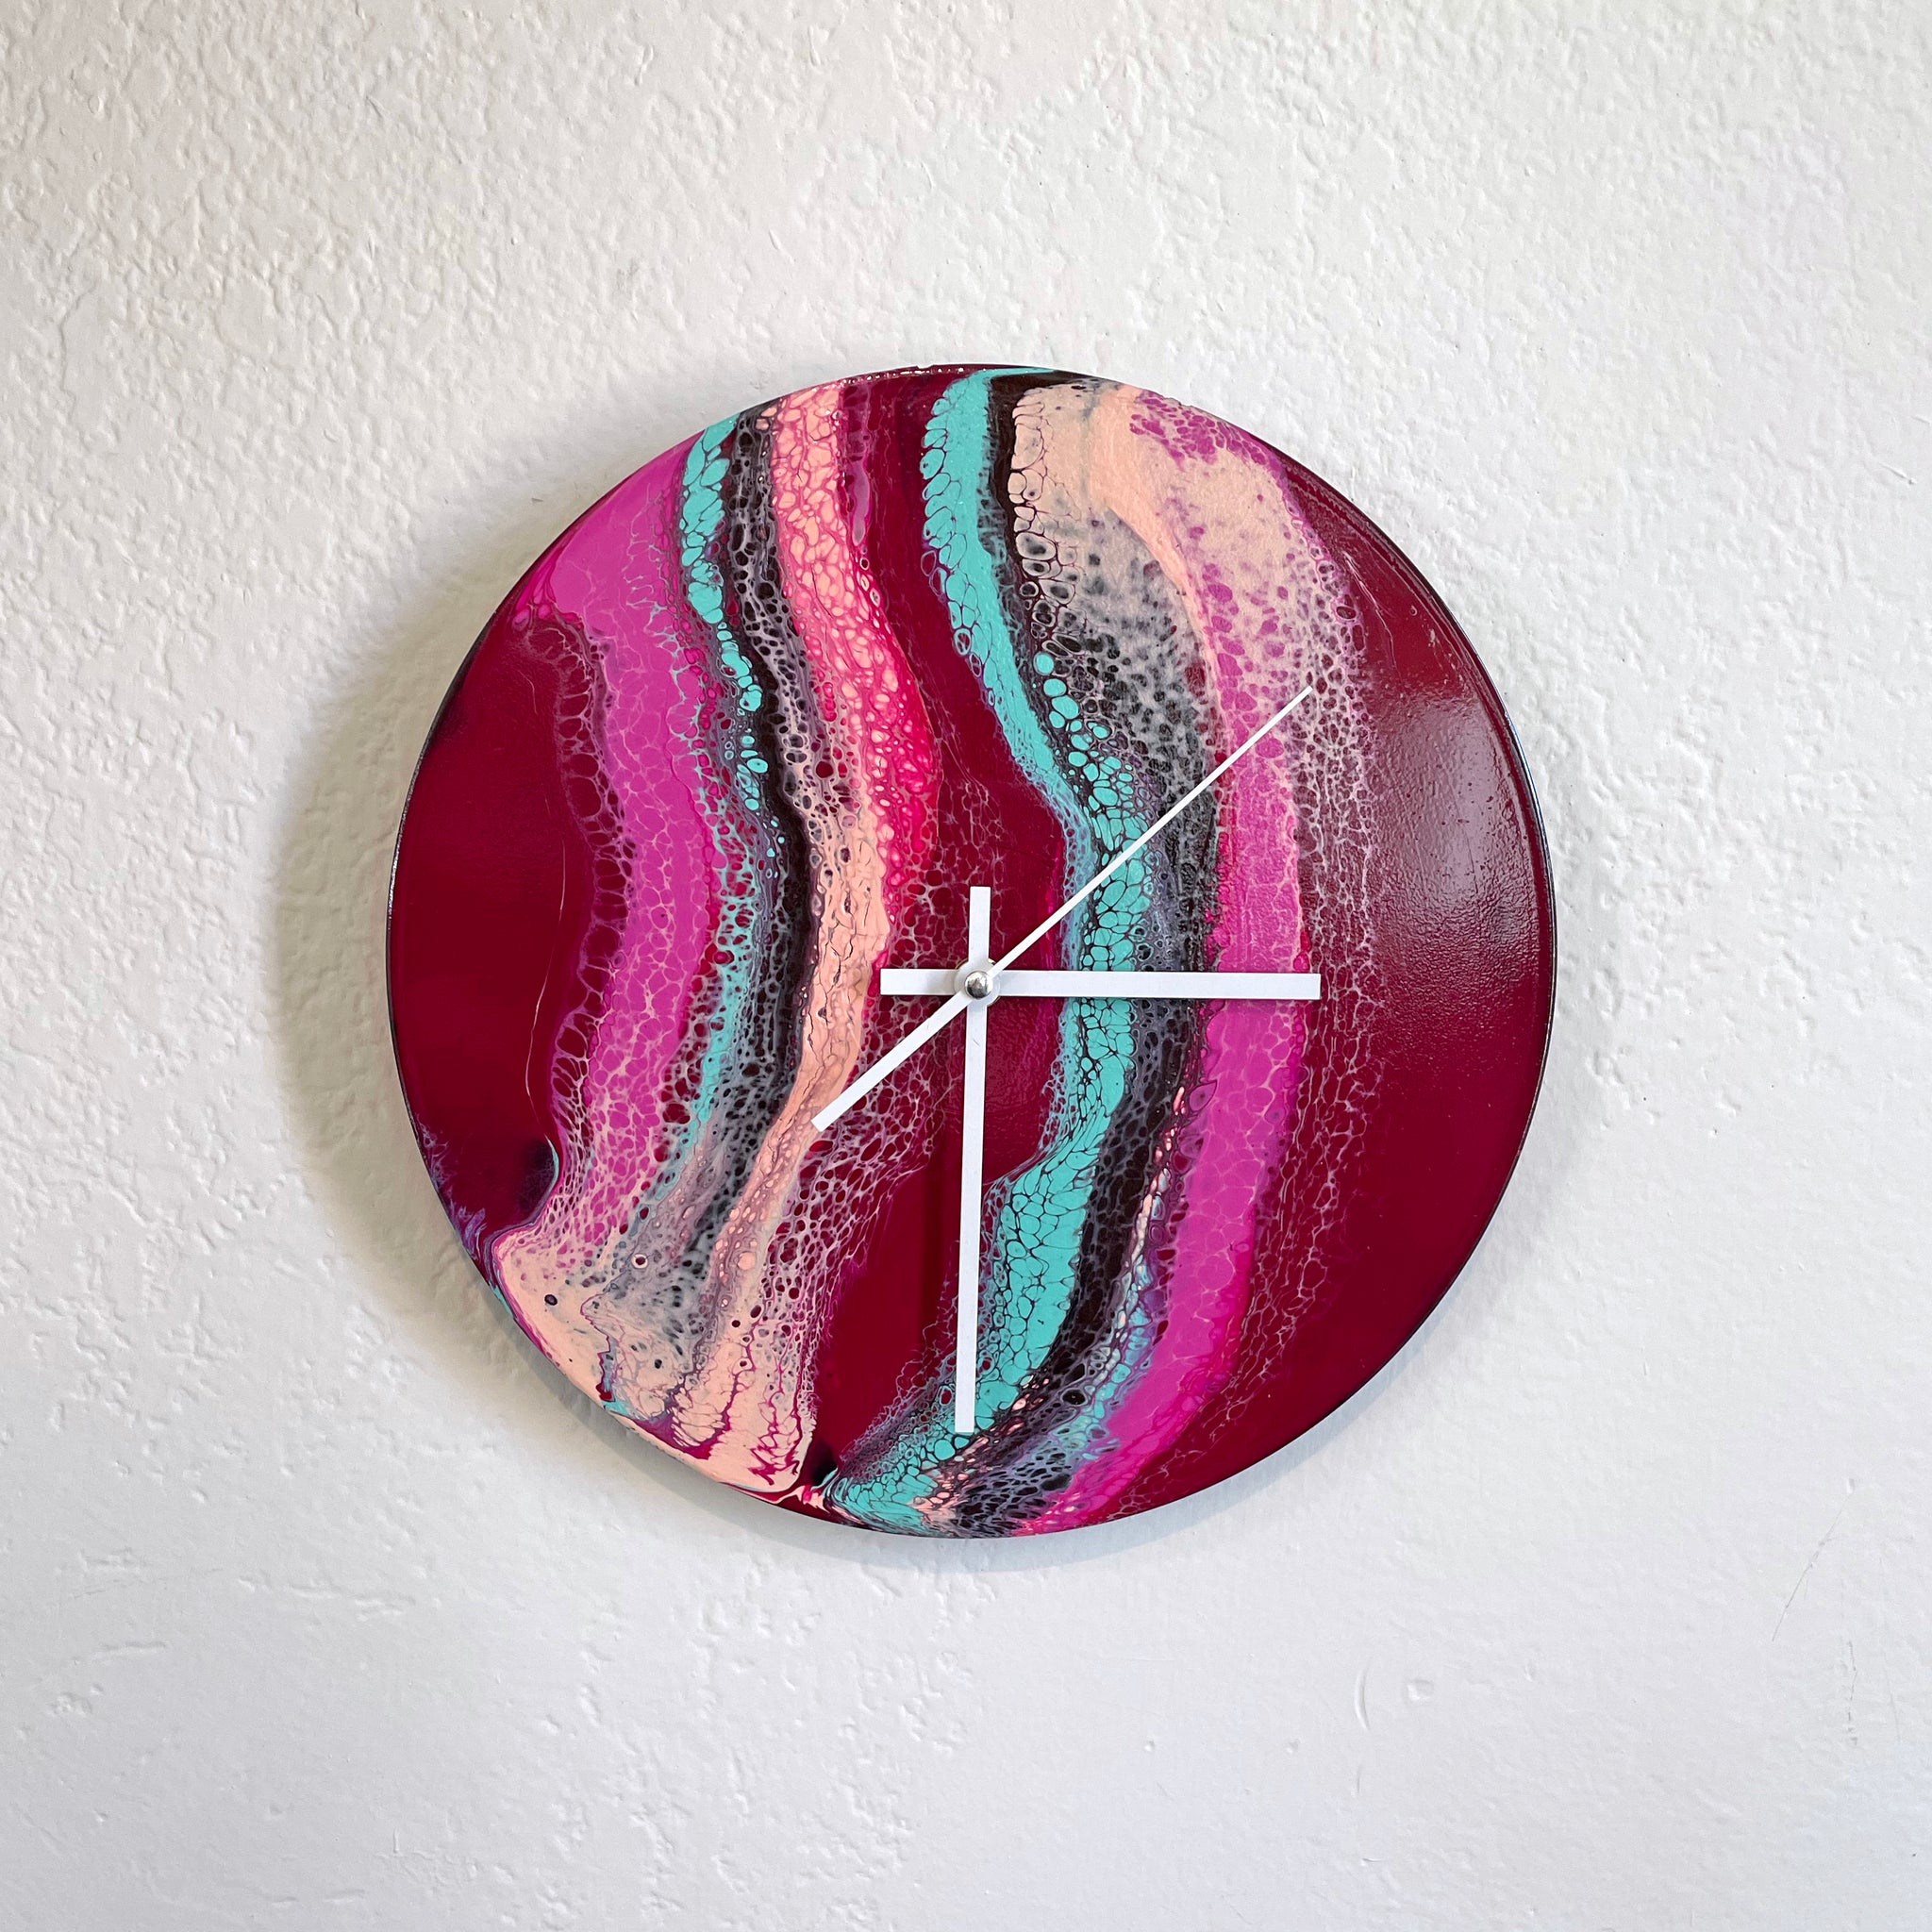 Independence - Upcycled Vinyl Record Pour Painting Clock